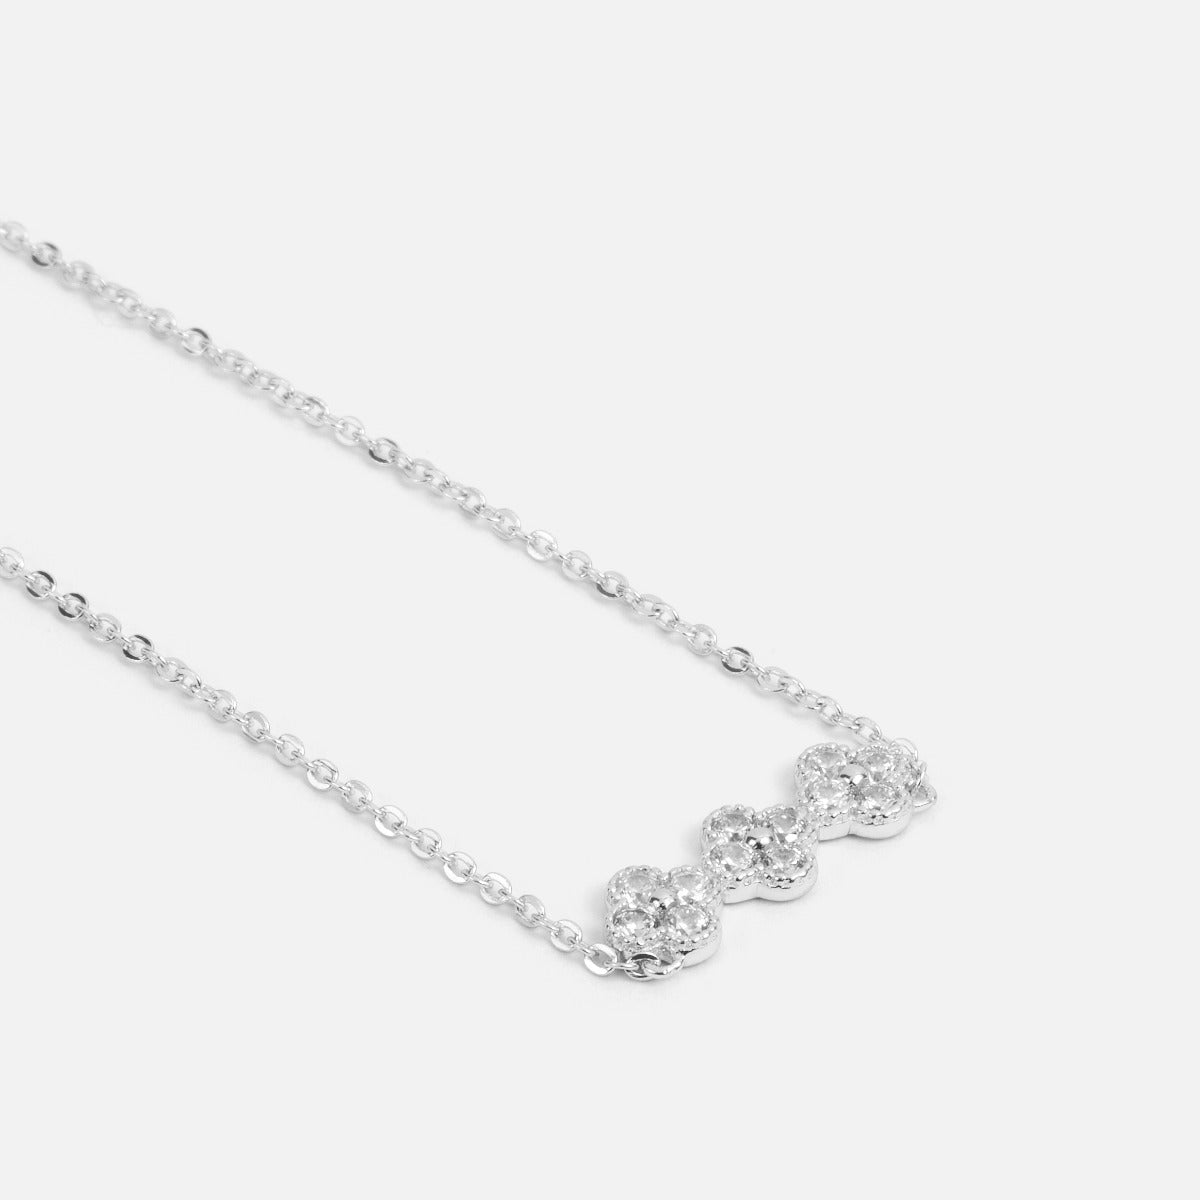 Sterling silver pendant with cubic zirconia flowers